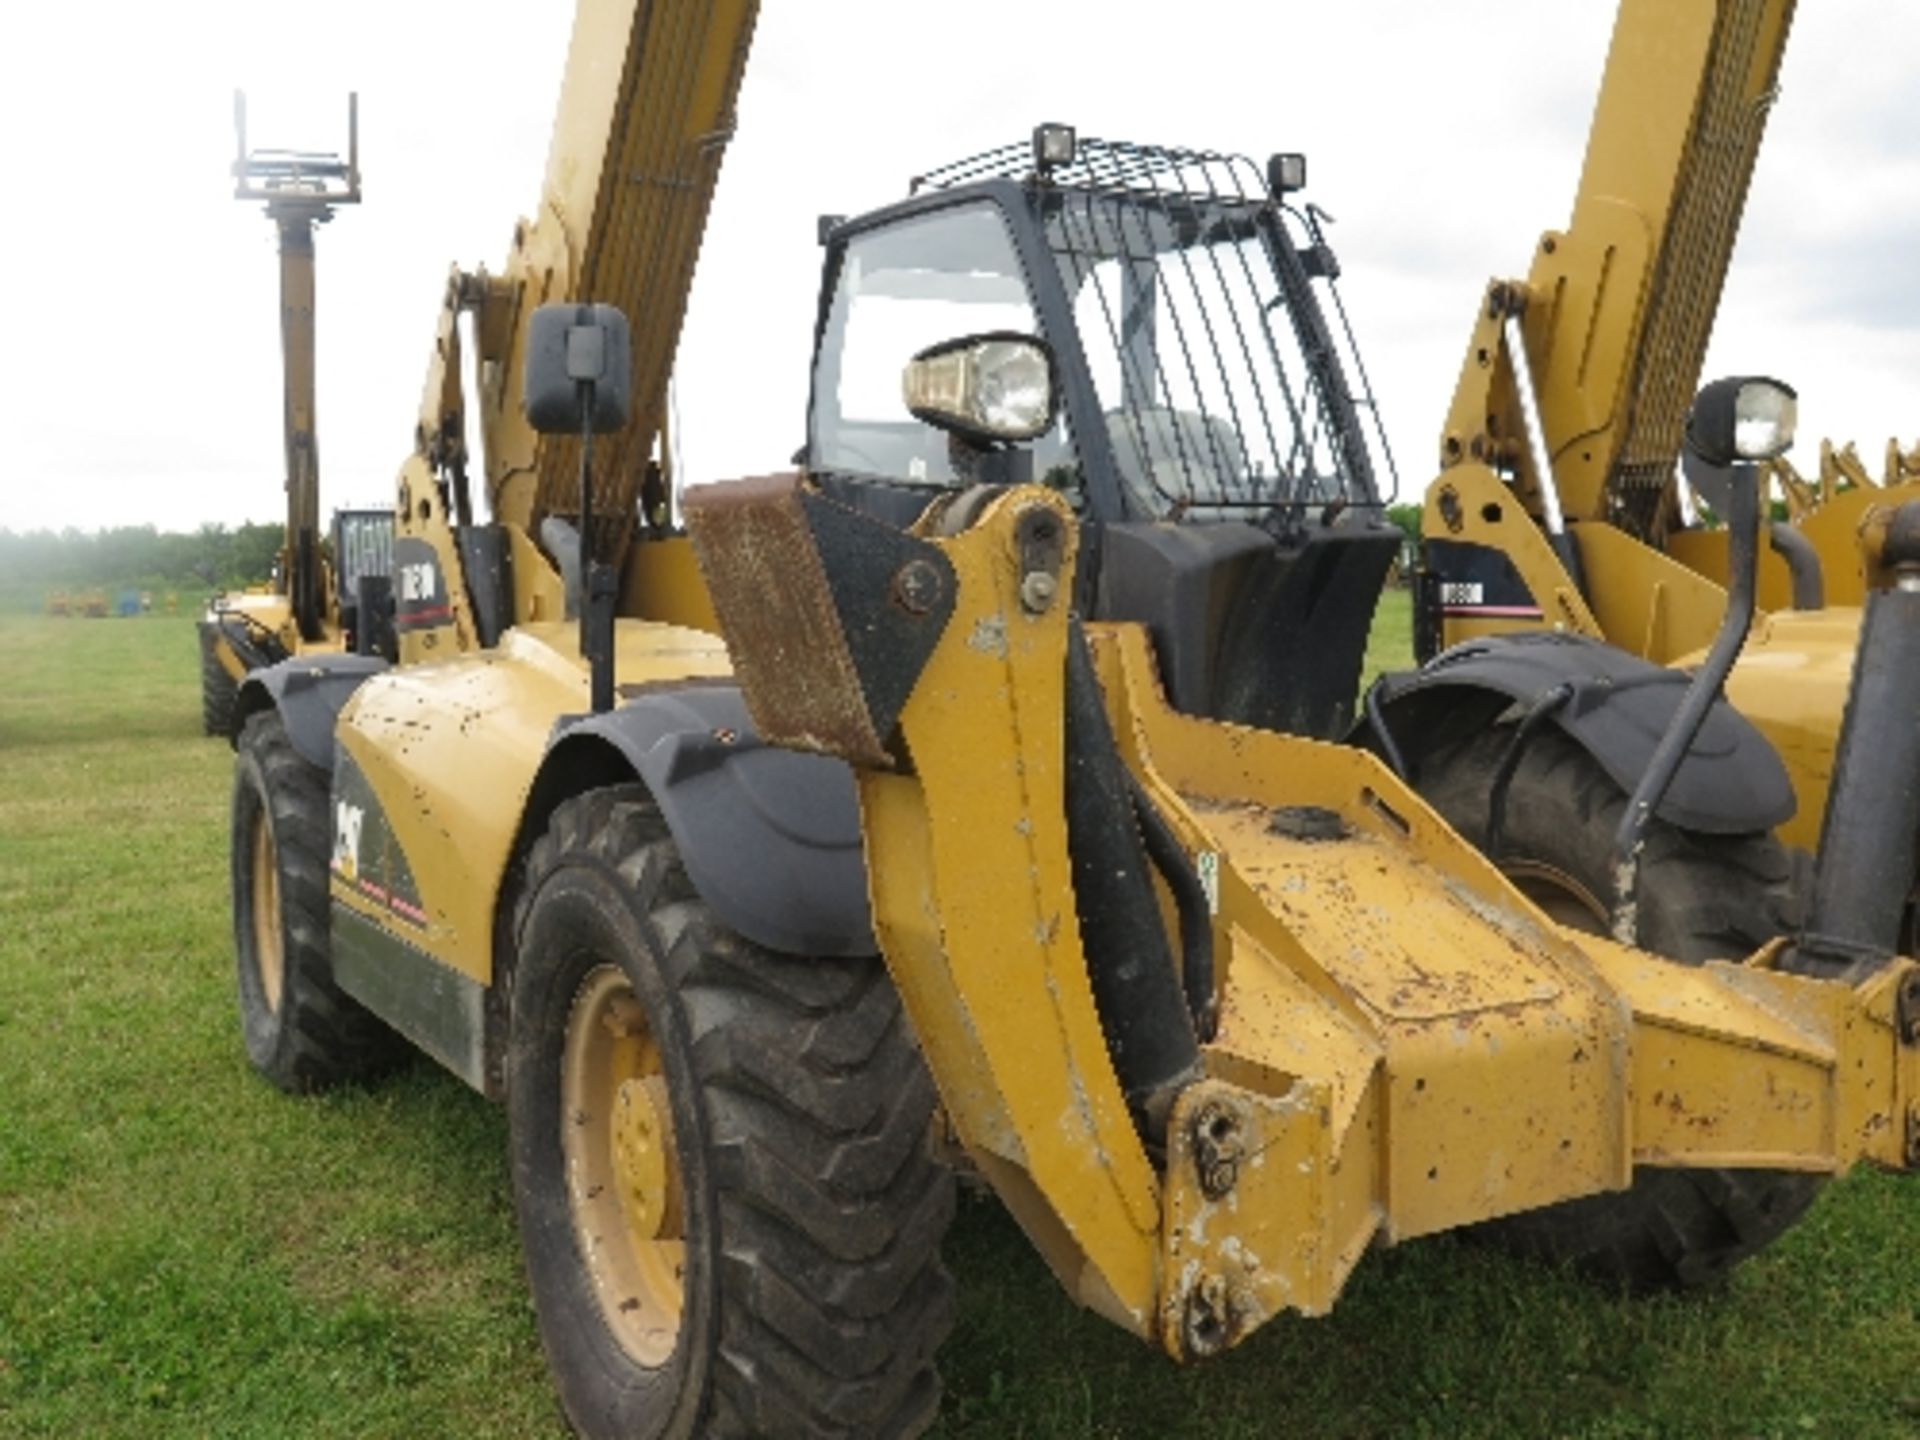 Caterpillar TH580B telehandler 4608 hrs  143934
BELIEVED 2006
NO TELE IN/OUT FUNCTION
ALL LOTS - Image 2 of 7